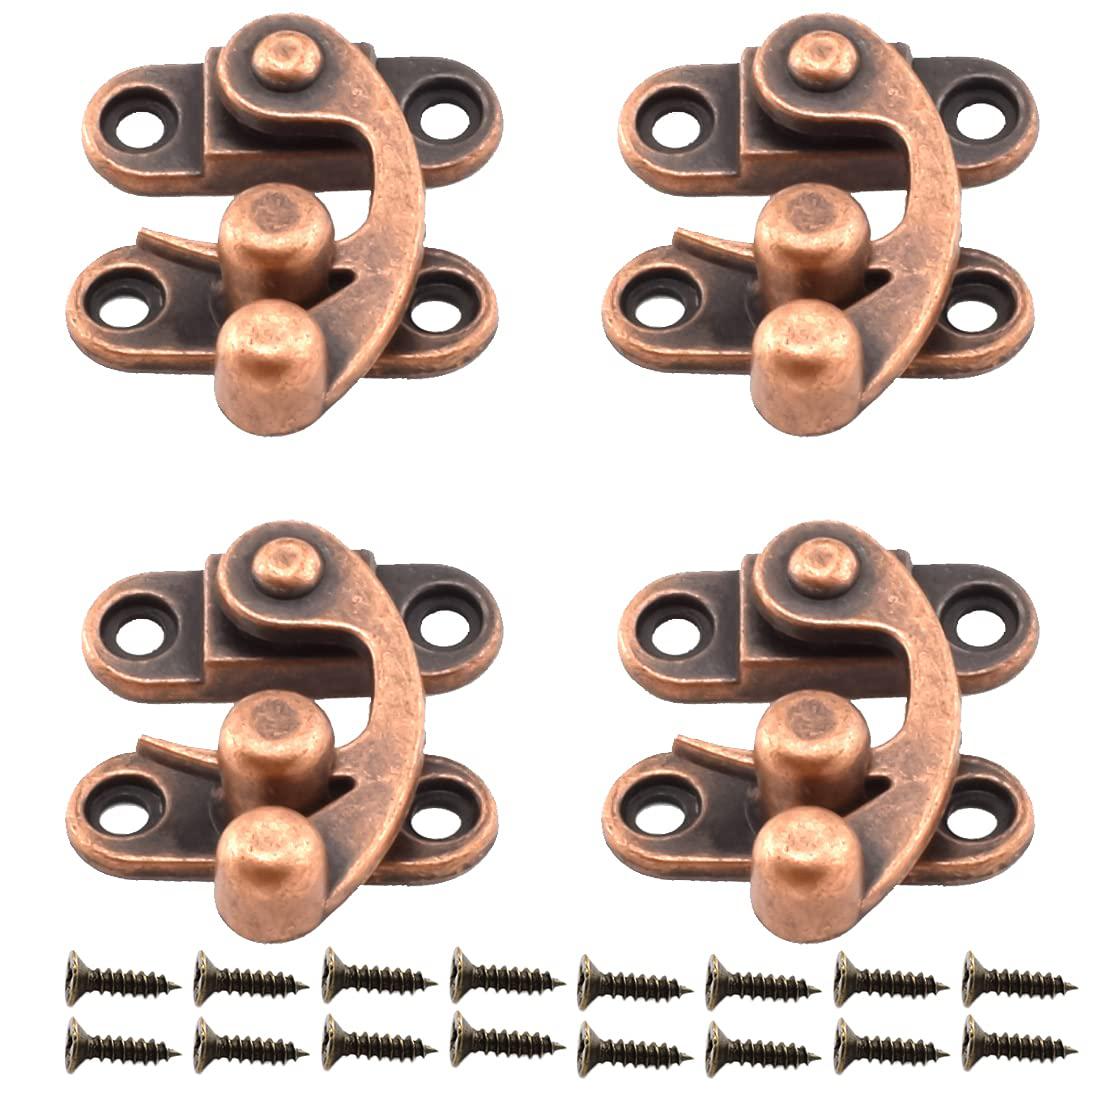 aifeier et antique right hook hasp latch retro swing horn lock clasp with mounting screws, zinc alloy - 4pcs 1.14 inch x 1.3 